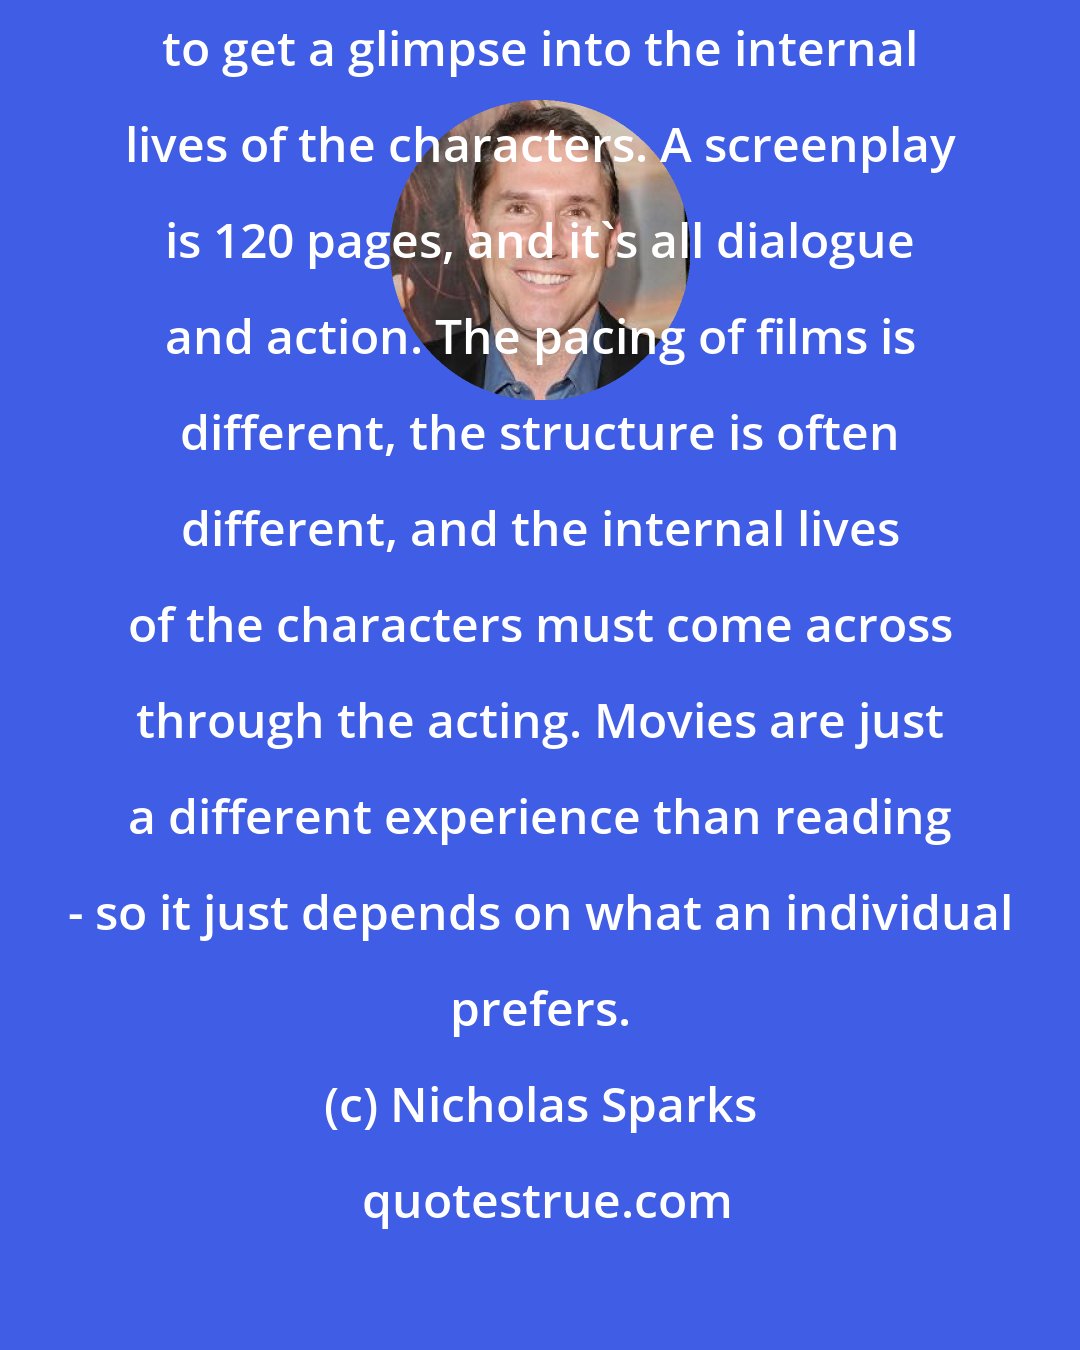 Nicholas Sparks: A book is maybe about 350 pages, and the prose allows for readers to get a glimpse into the internal lives of the characters. A screenplay is 120 pages, and it's all dialogue and action. The pacing of films is different, the structure is often different, and the internal lives of the characters must come across through the acting. Movies are just a different experience than reading - so it just depends on what an individual prefers.